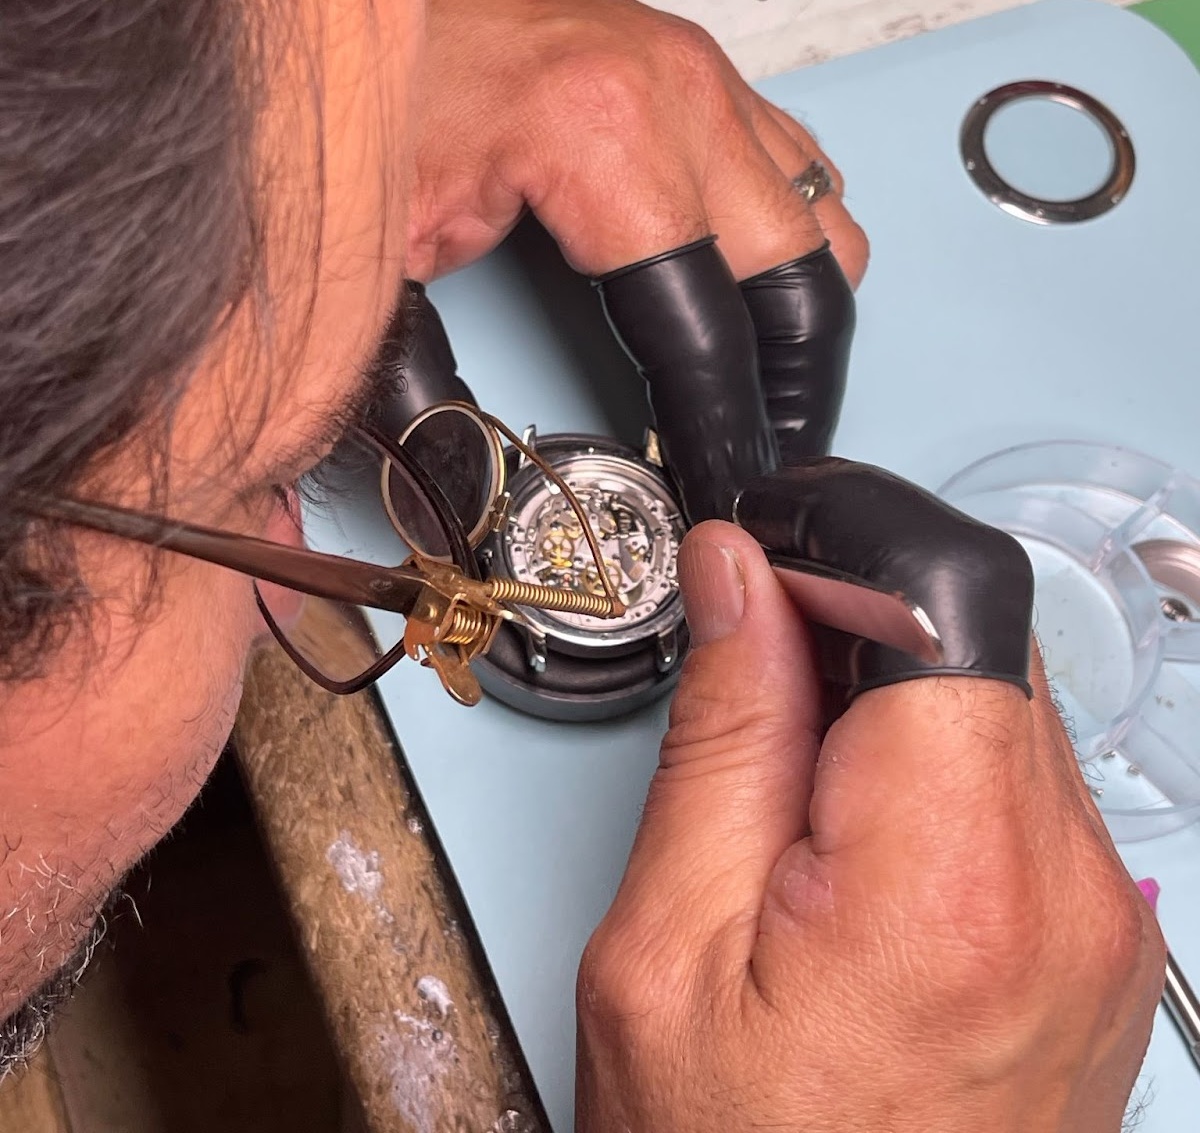 Gray & Sons - Top Watch Repair Service Center For High Caliber Watches